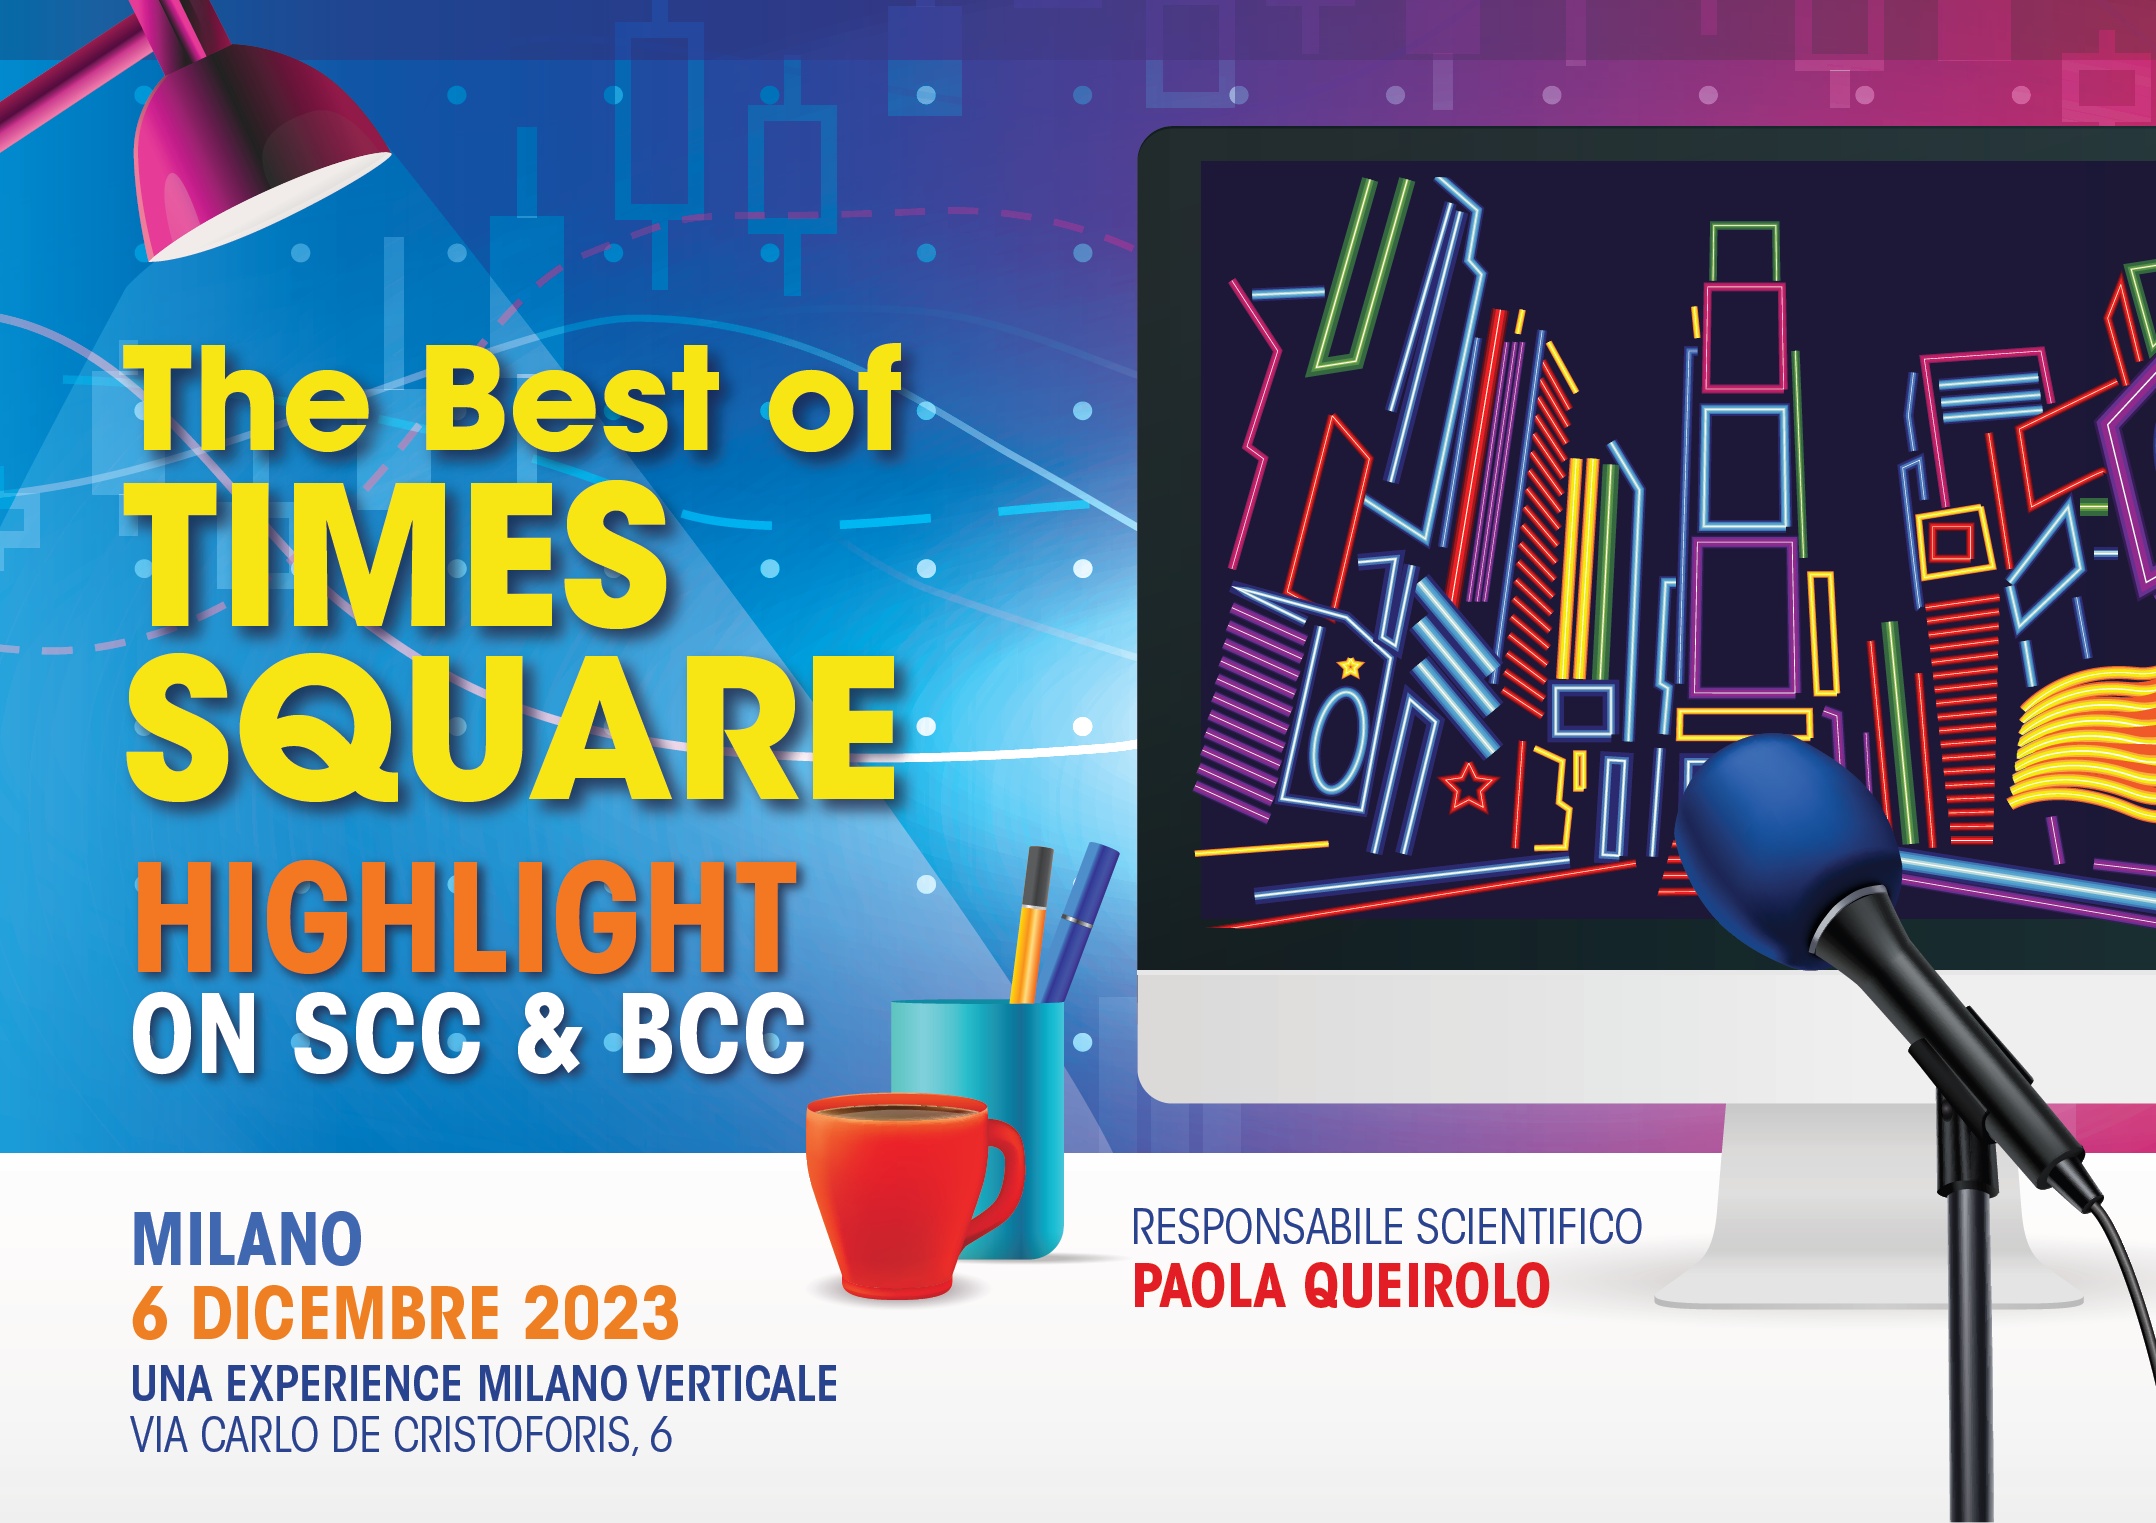 THE BEST OF TIMES SQUARE: HIGHLIGHT ON SCC & BCC